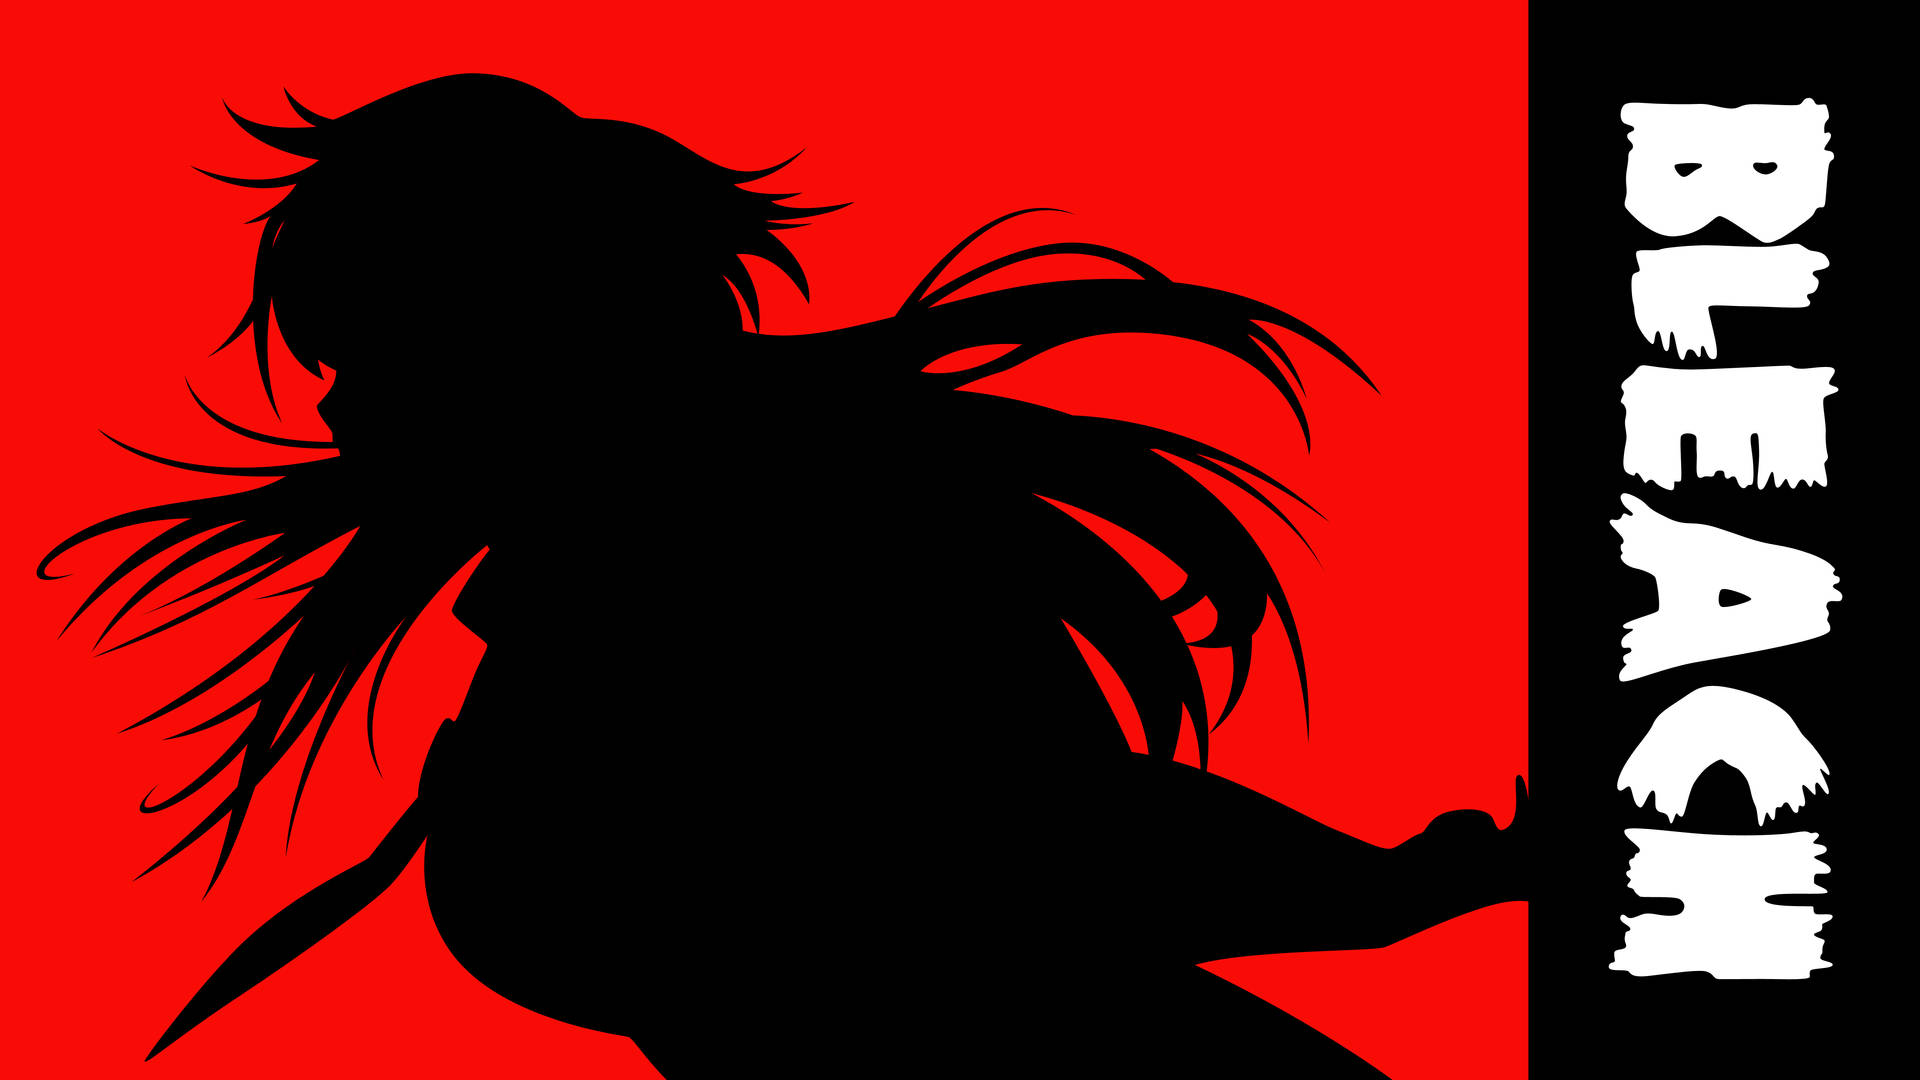 Orihime Inoue Silhouette Bleach 4k Ultra Hd Poster Background